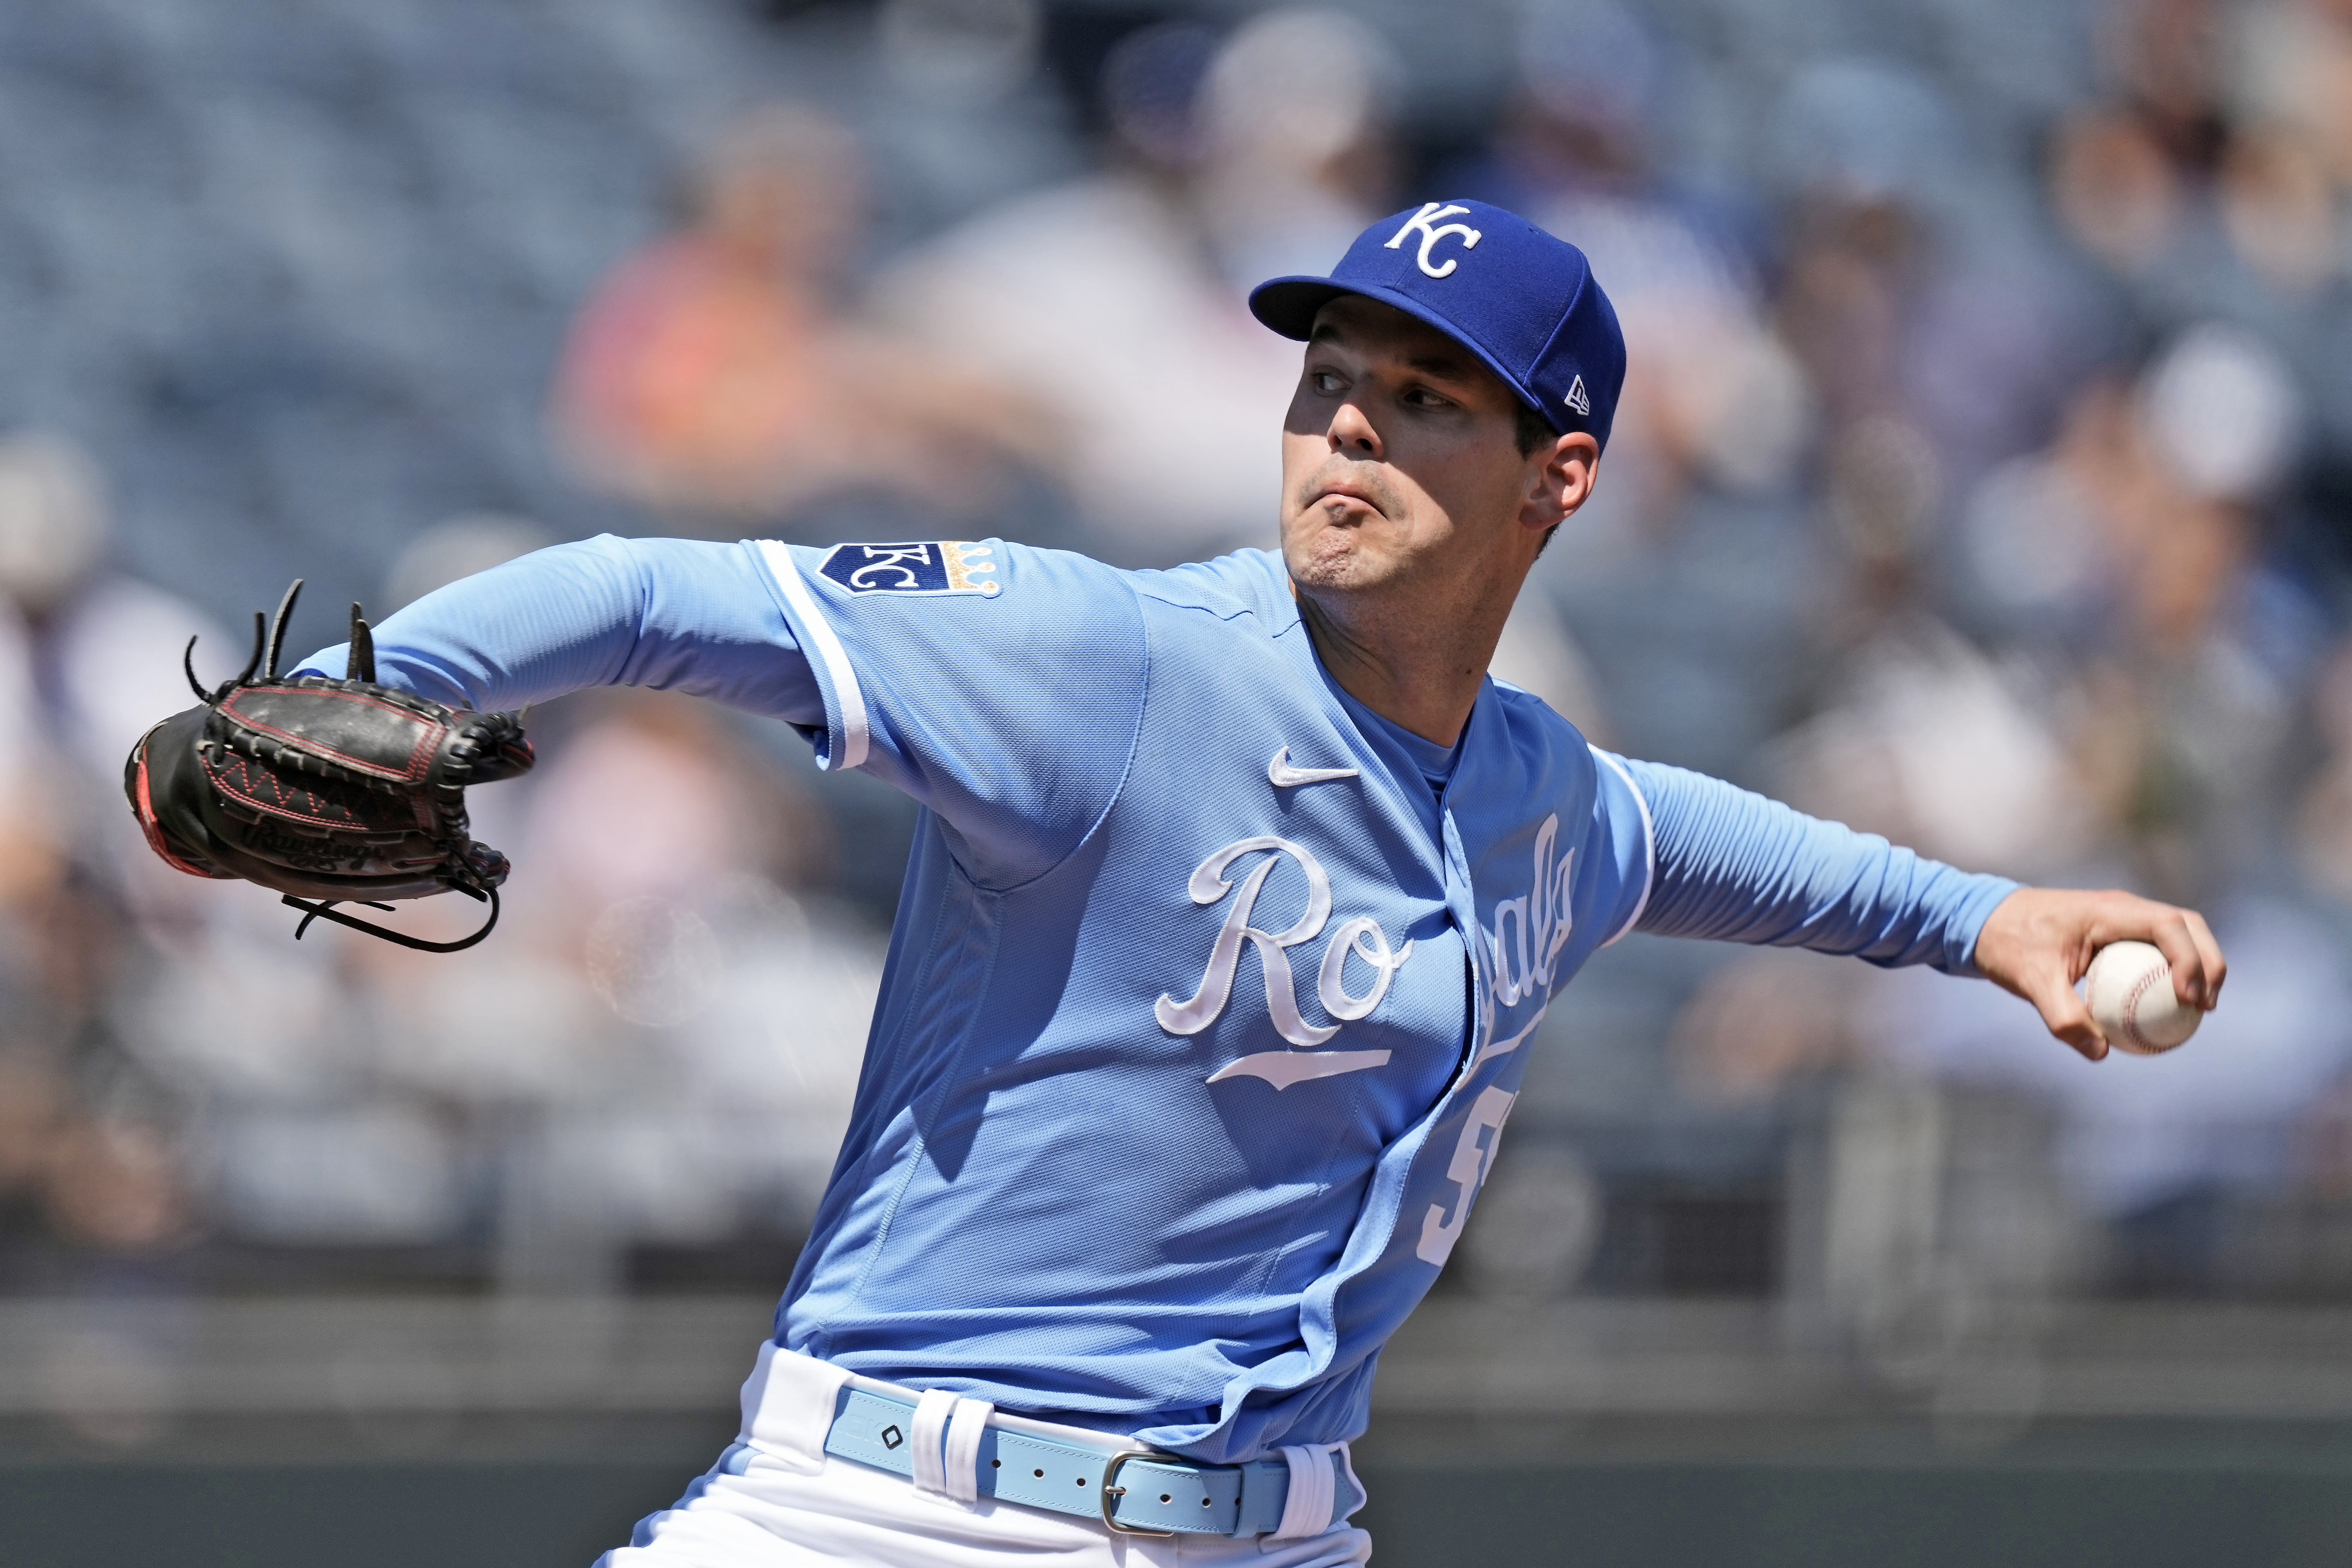 Royals get “balk off” win over White Sox after rallying from deficit